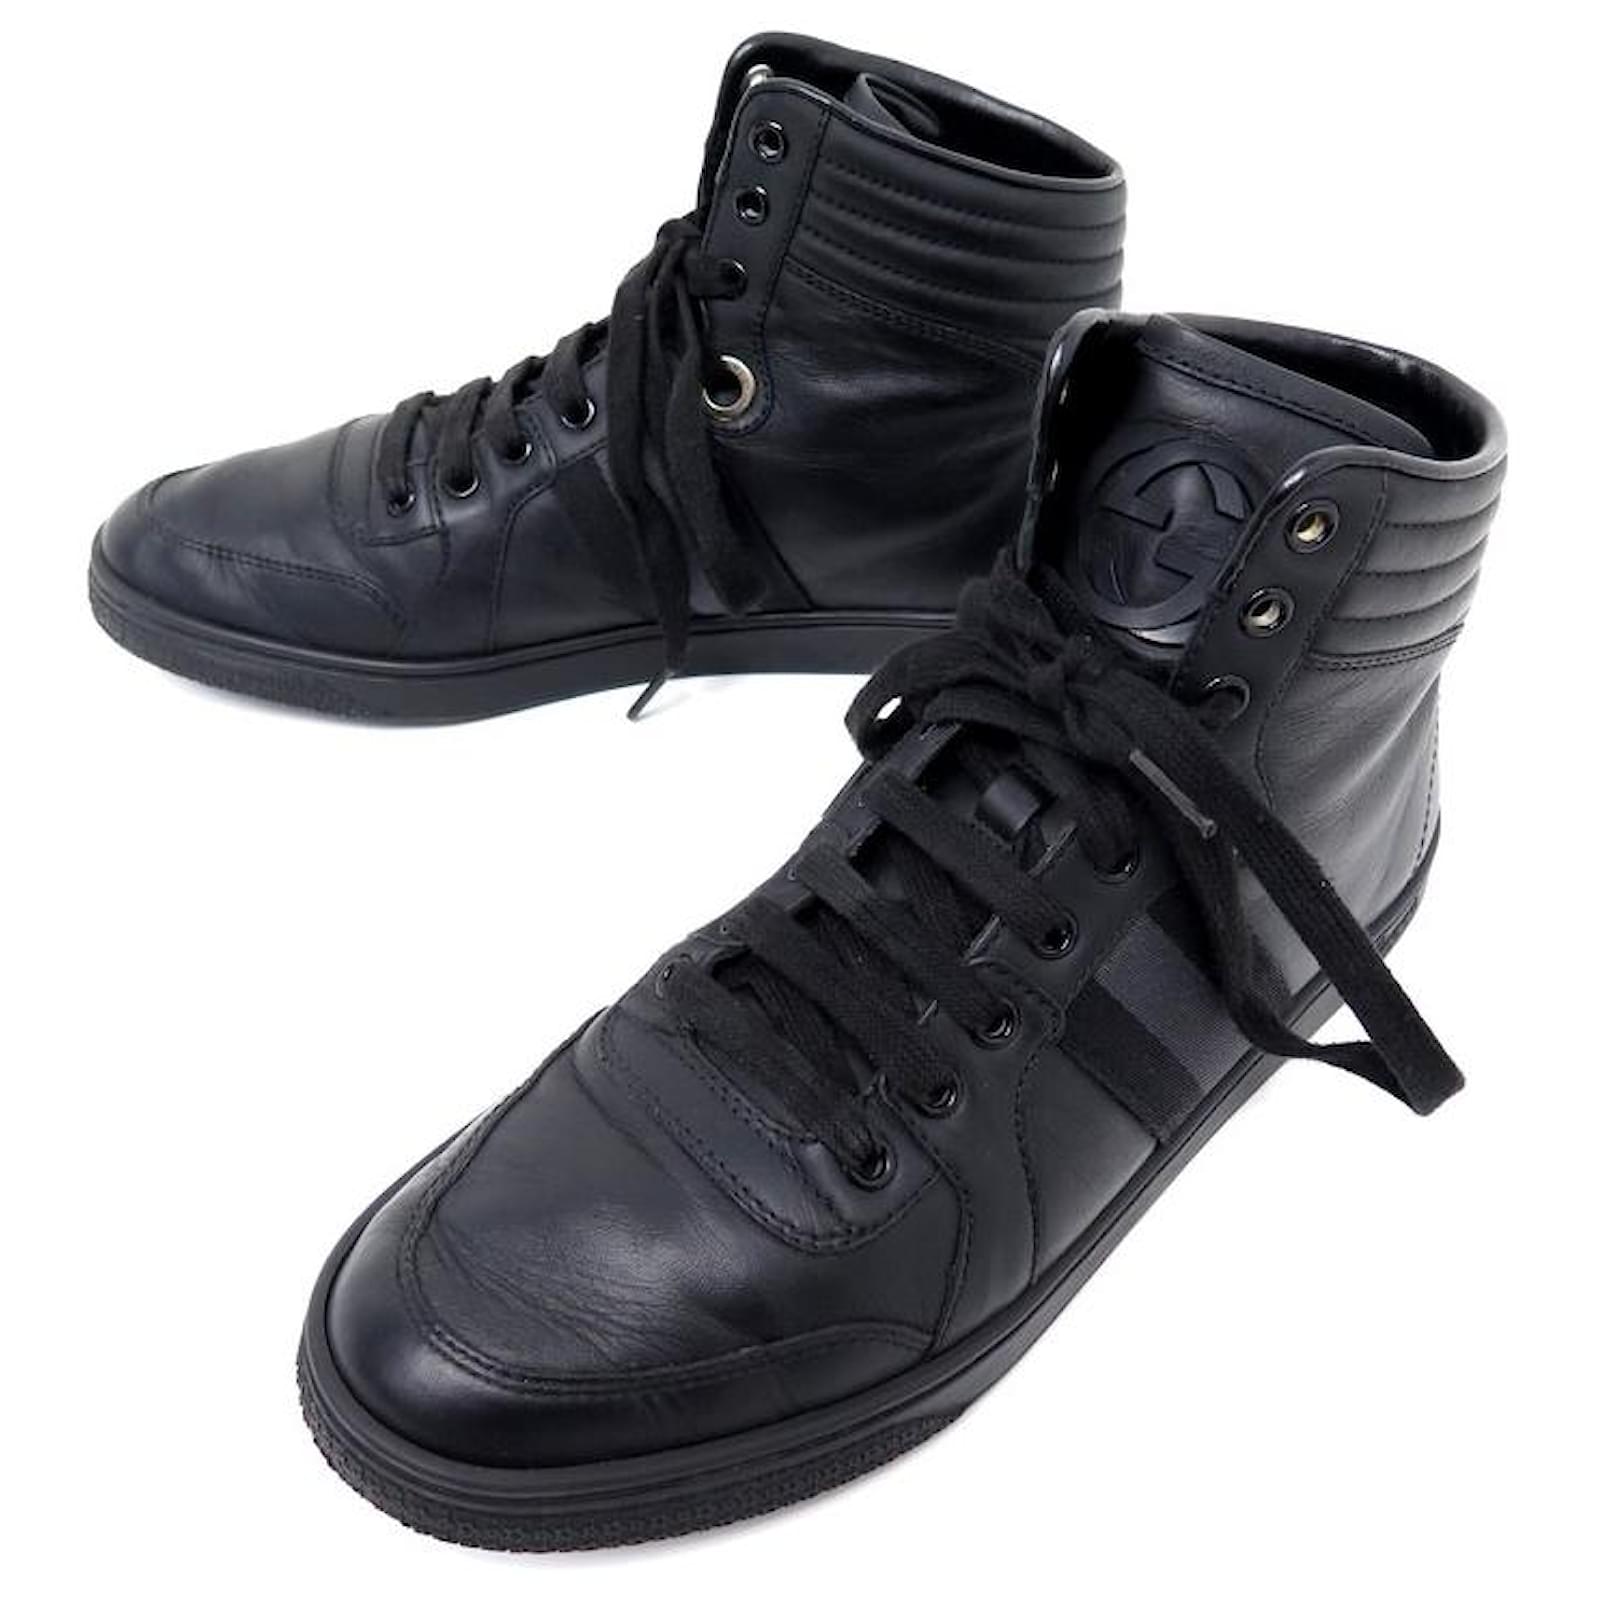 GUCCI SHOES HIGH TOP SNEAKERS SNEAKERS 309555 38.5 IT 39.5 EN LEATHER ...